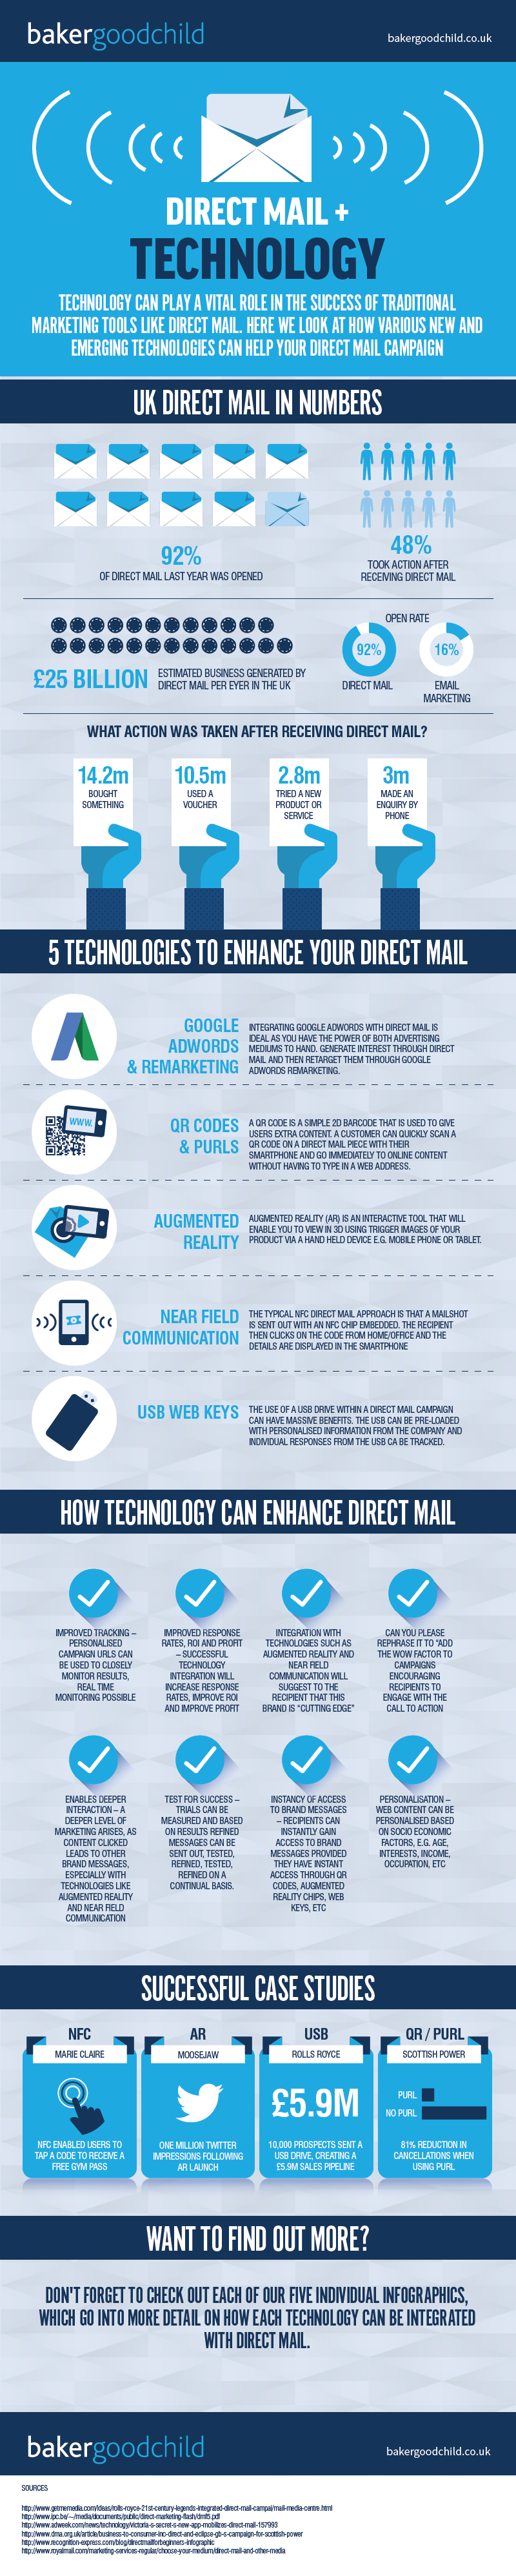 Technology and Direct Mail